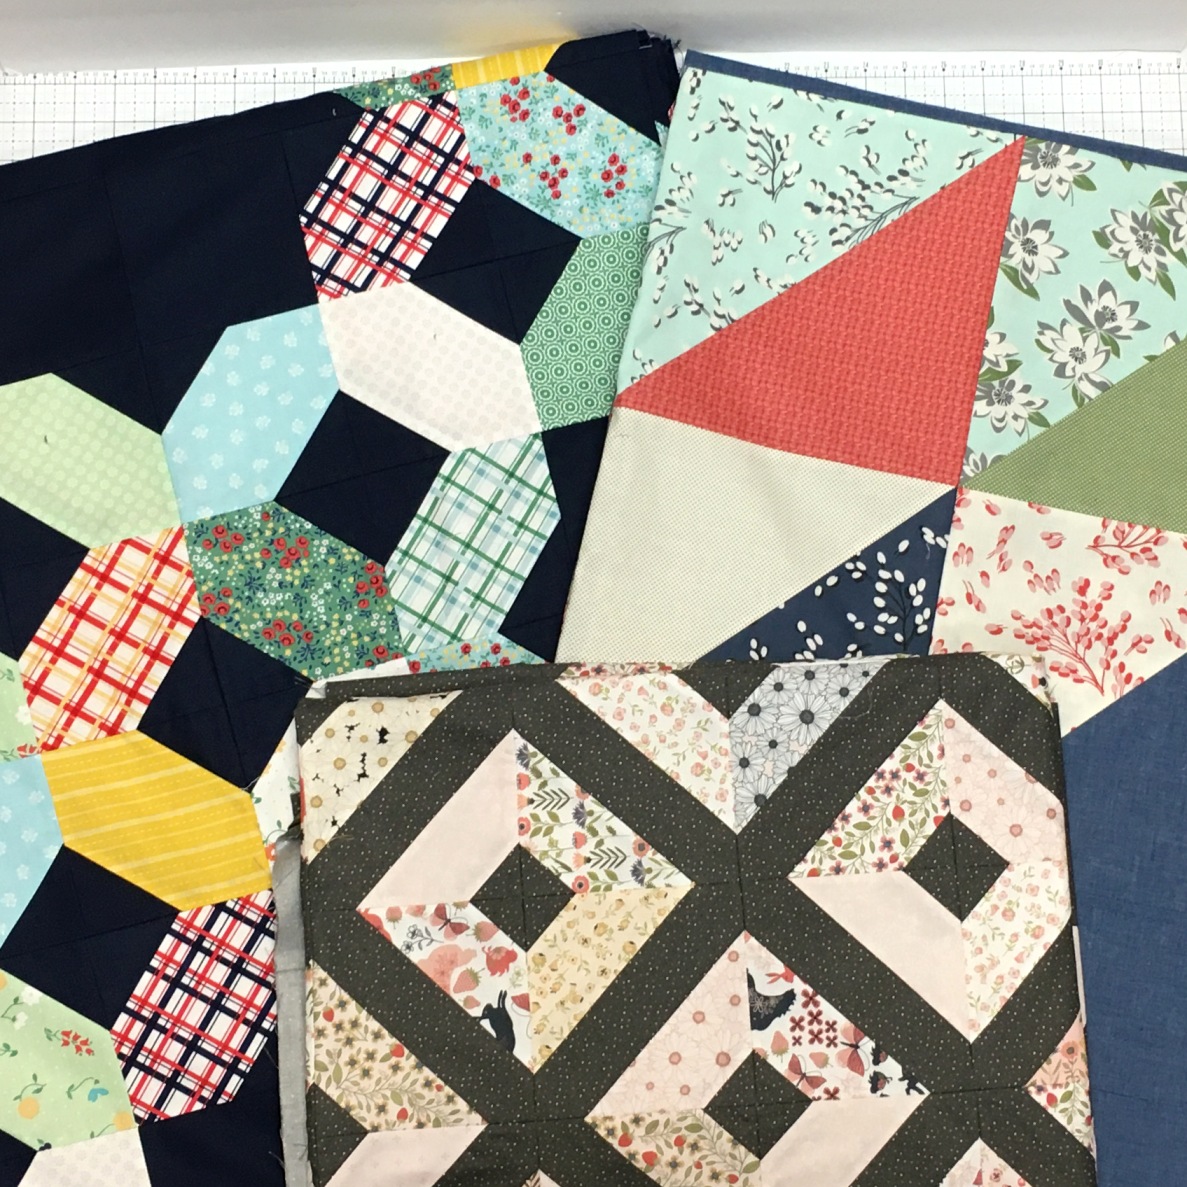 Happy Quilting: Time for some Happy Quilting!!!!